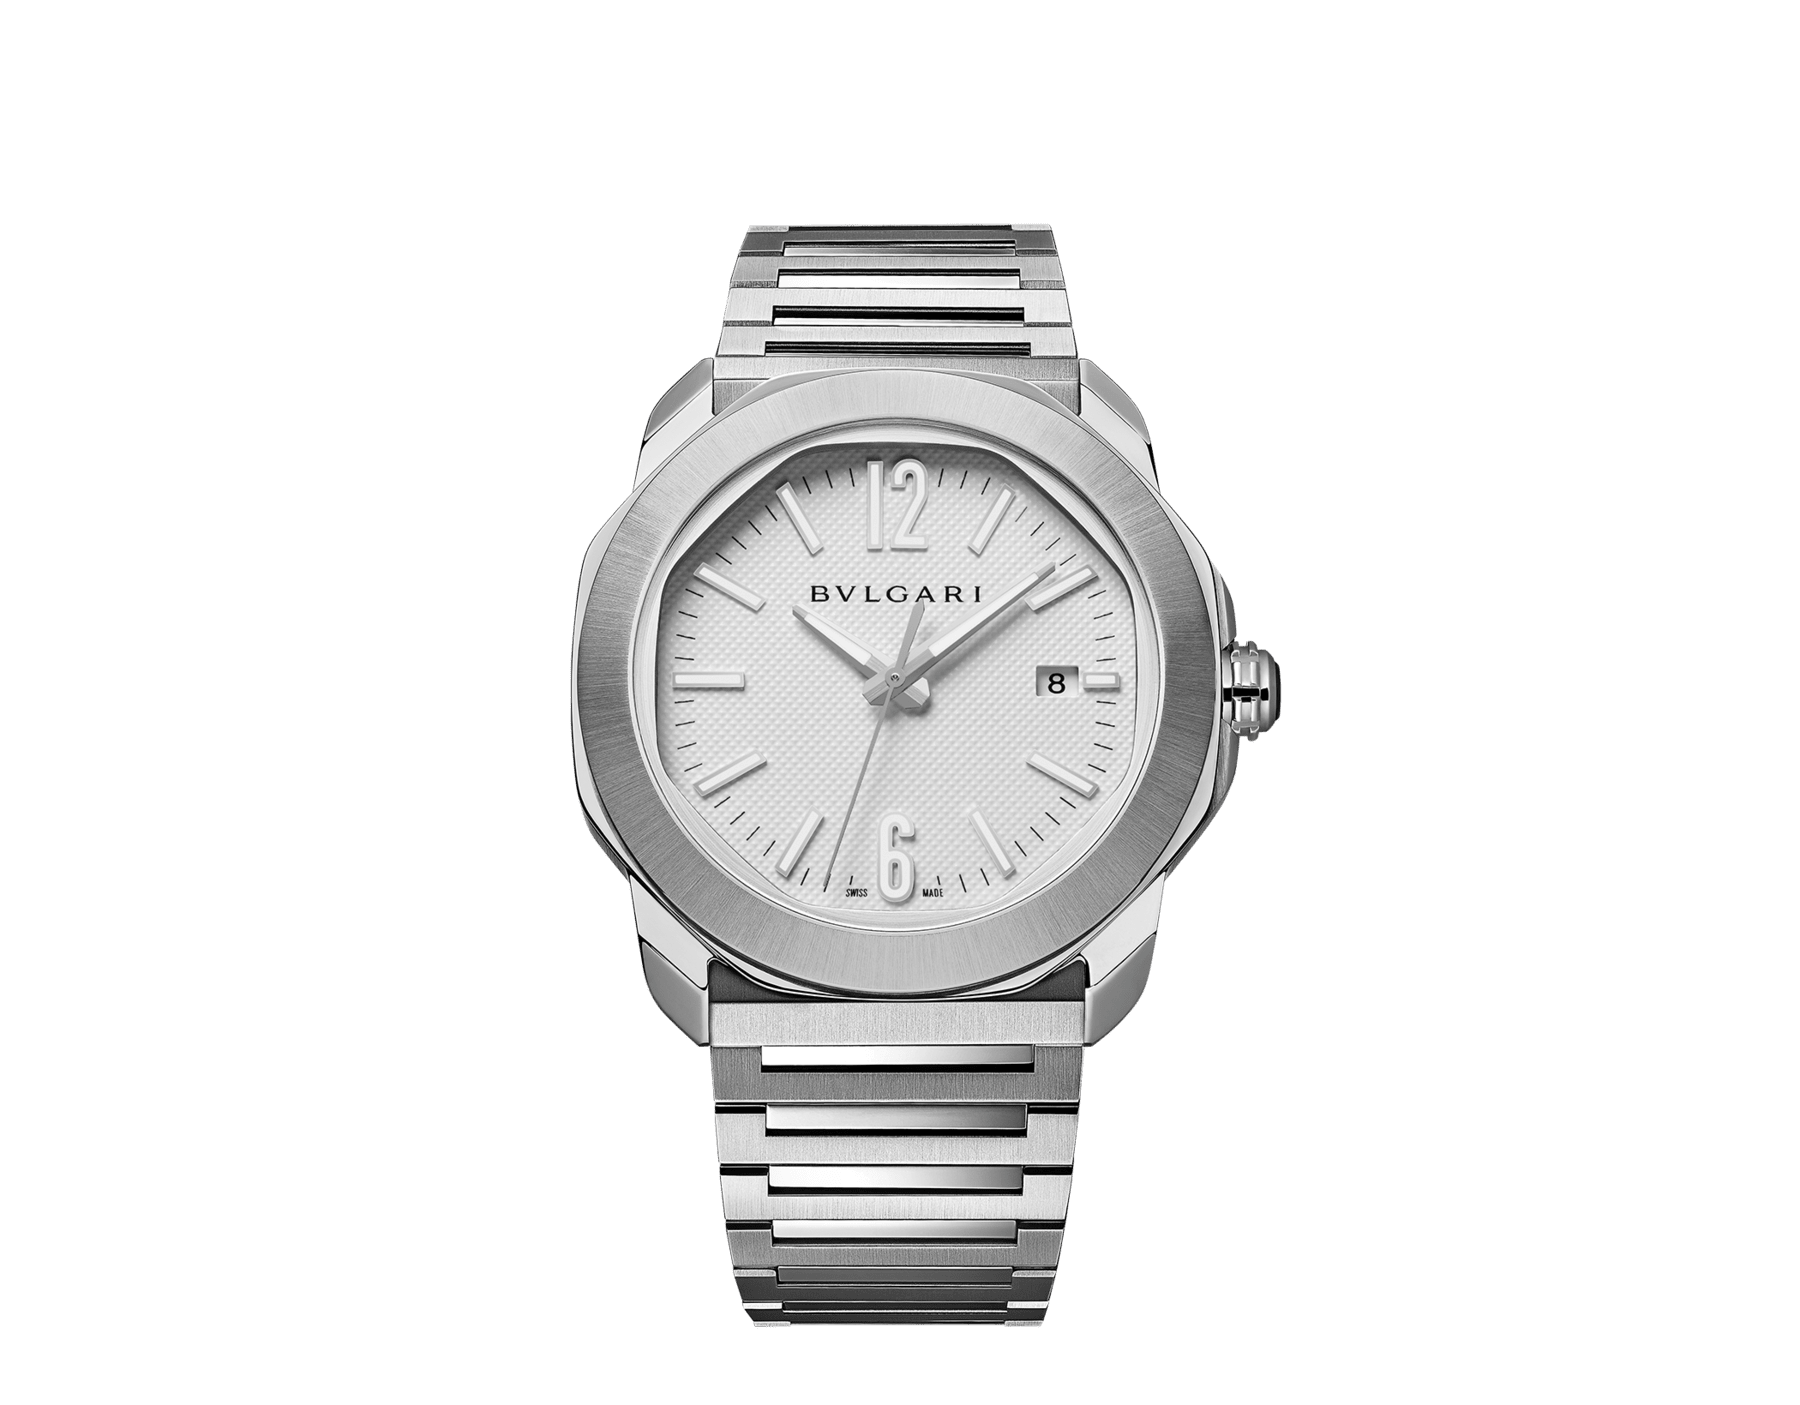 Octo Roma Automatic watch with mechanical manufacture movement, automatic winding, satin-brushed and polished stainless steel case and interchangeable bracelet, gray Clous de Paris dial. Water-resistant up to 100 meters. 103738 image 1